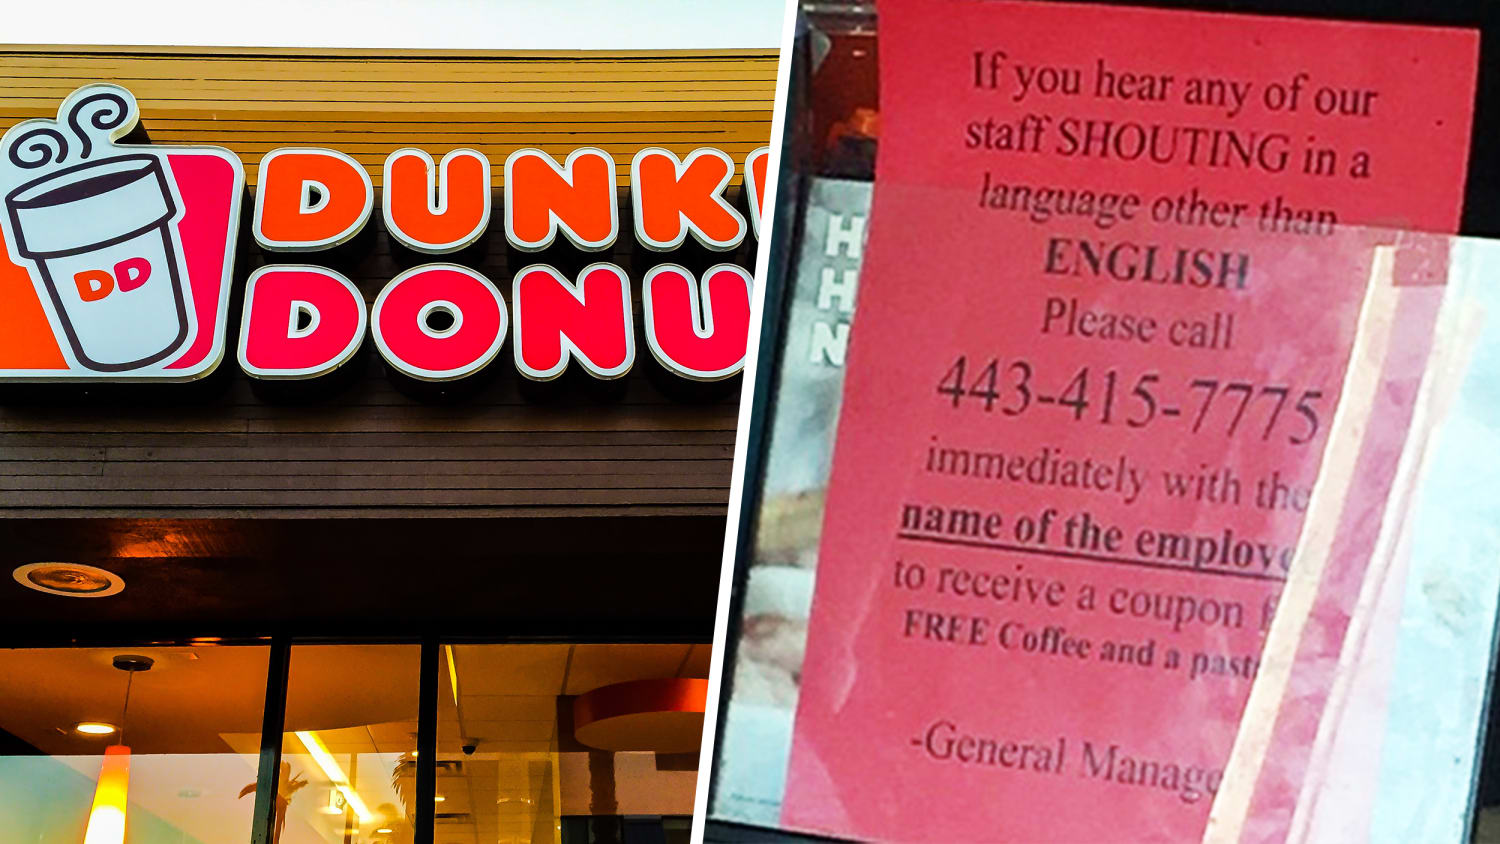 Baltimore Dunkin' Donuts sign causes social media uproar